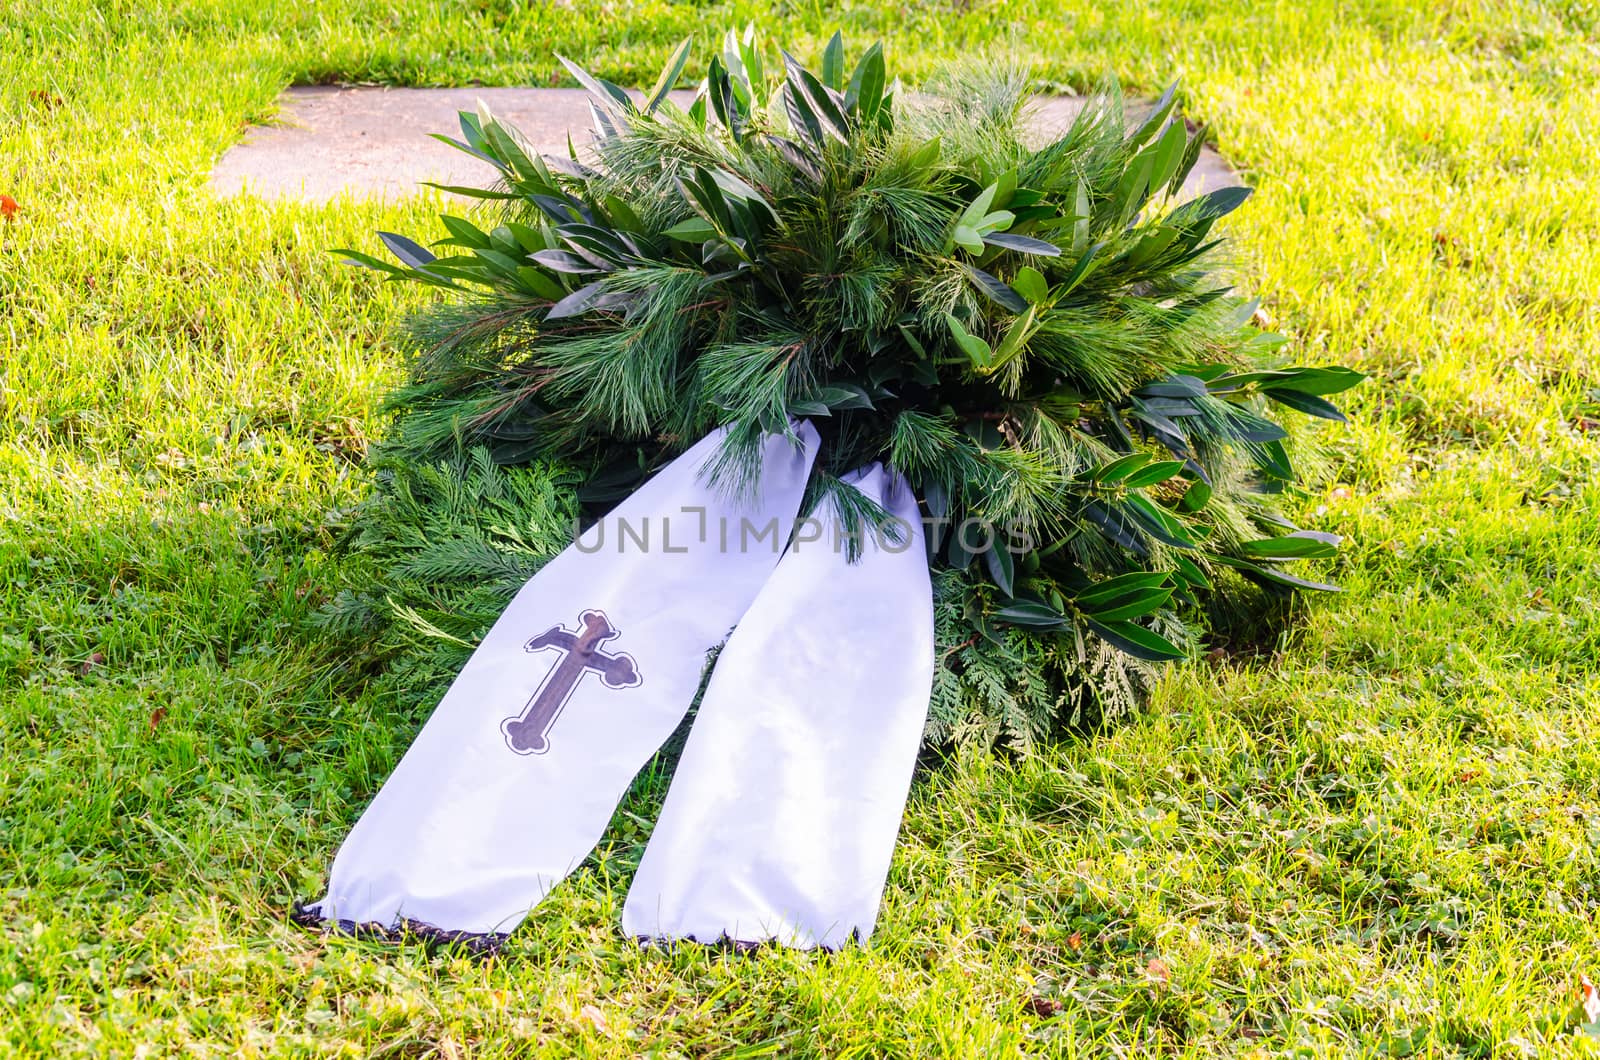 Wreath with banner and cross. Banners with copy space.